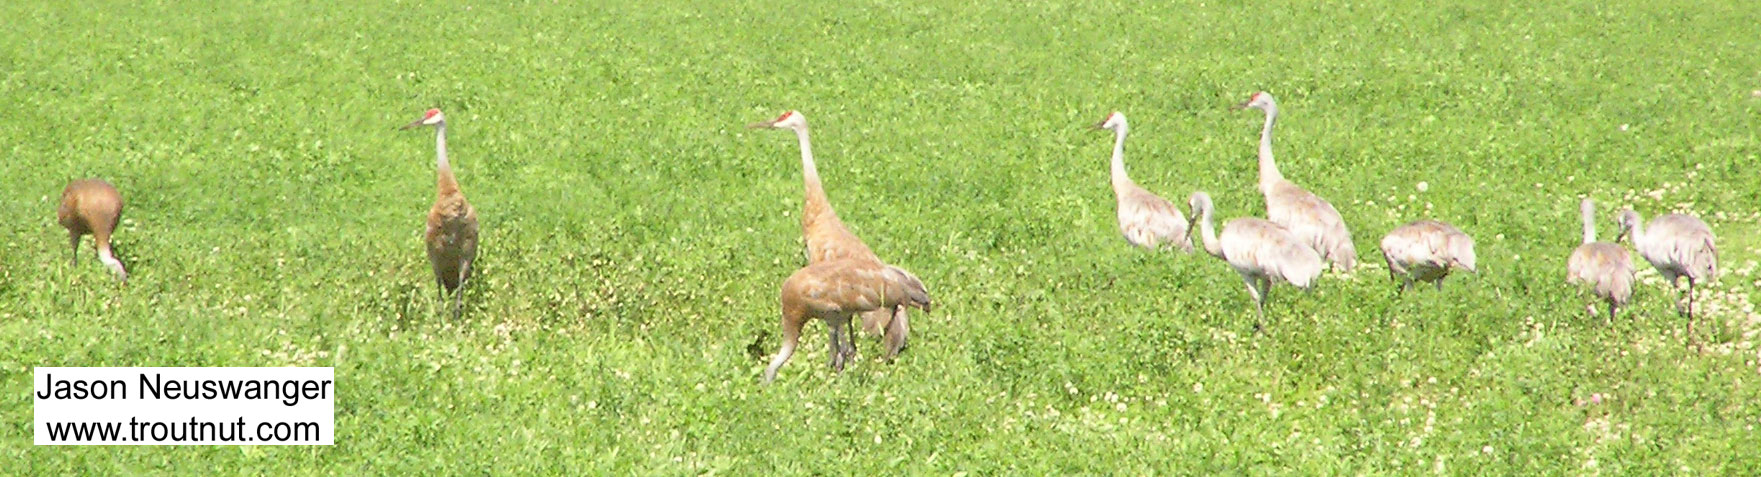 On my way to a favorite brook trout stream, I spotted several sandhill cranes in a Wisconsin farm field. From Rusk County, WI in Wisconsin.